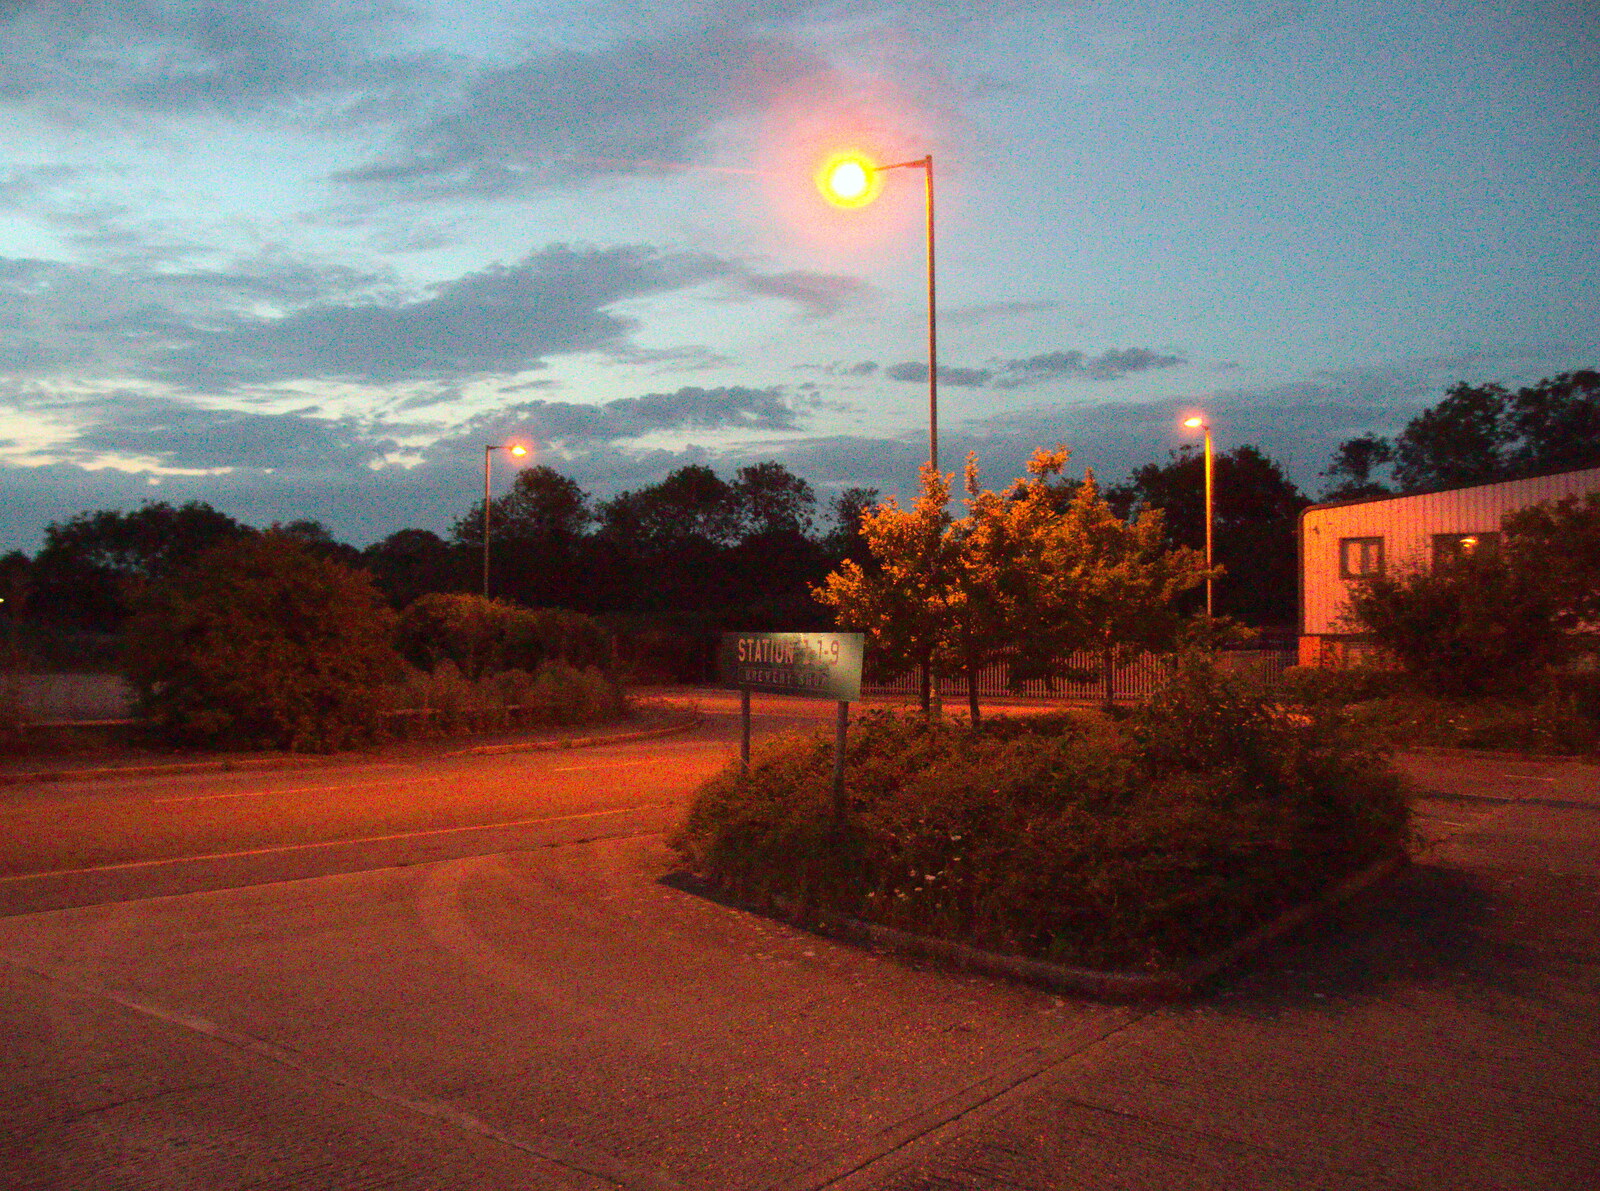 Sodium light on Progress Way from The BSCC at The Earl Soham Victoria and Station 119, Eye, Suffolk - 6th August 2020